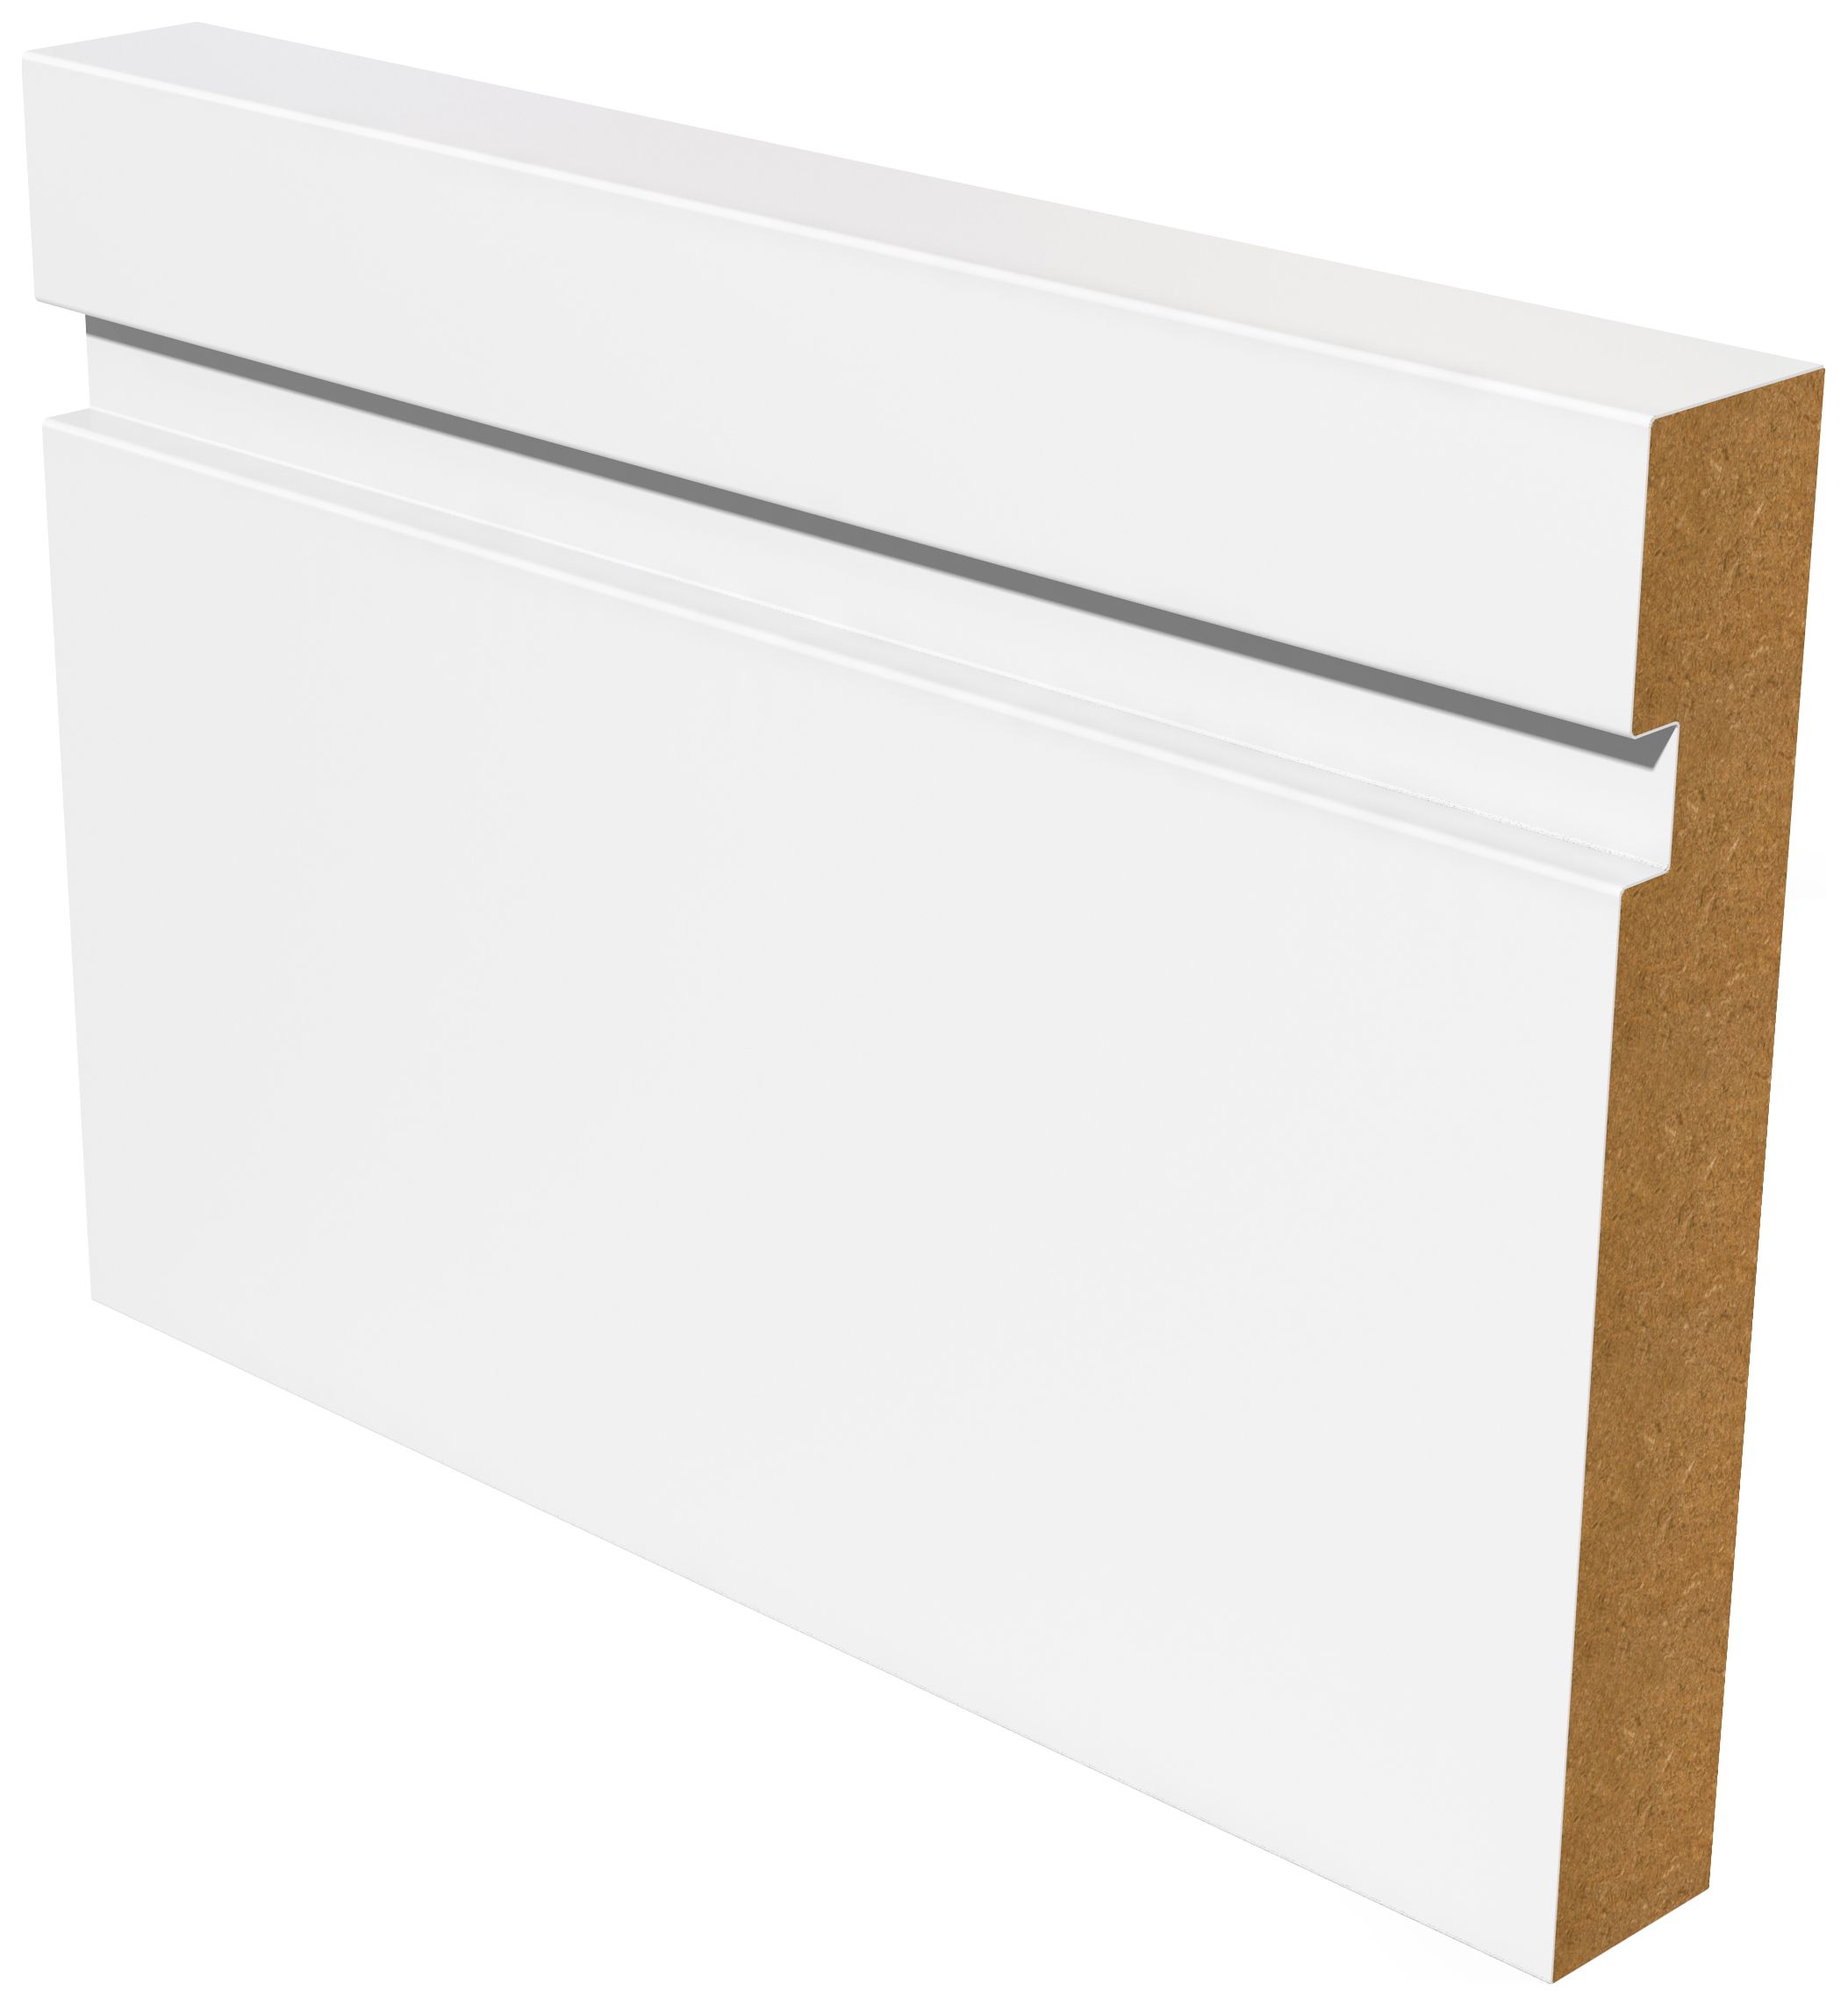 Image of Wickes Grooved Square Edge White MDF Skirting - 18 x 169 x 4200mm